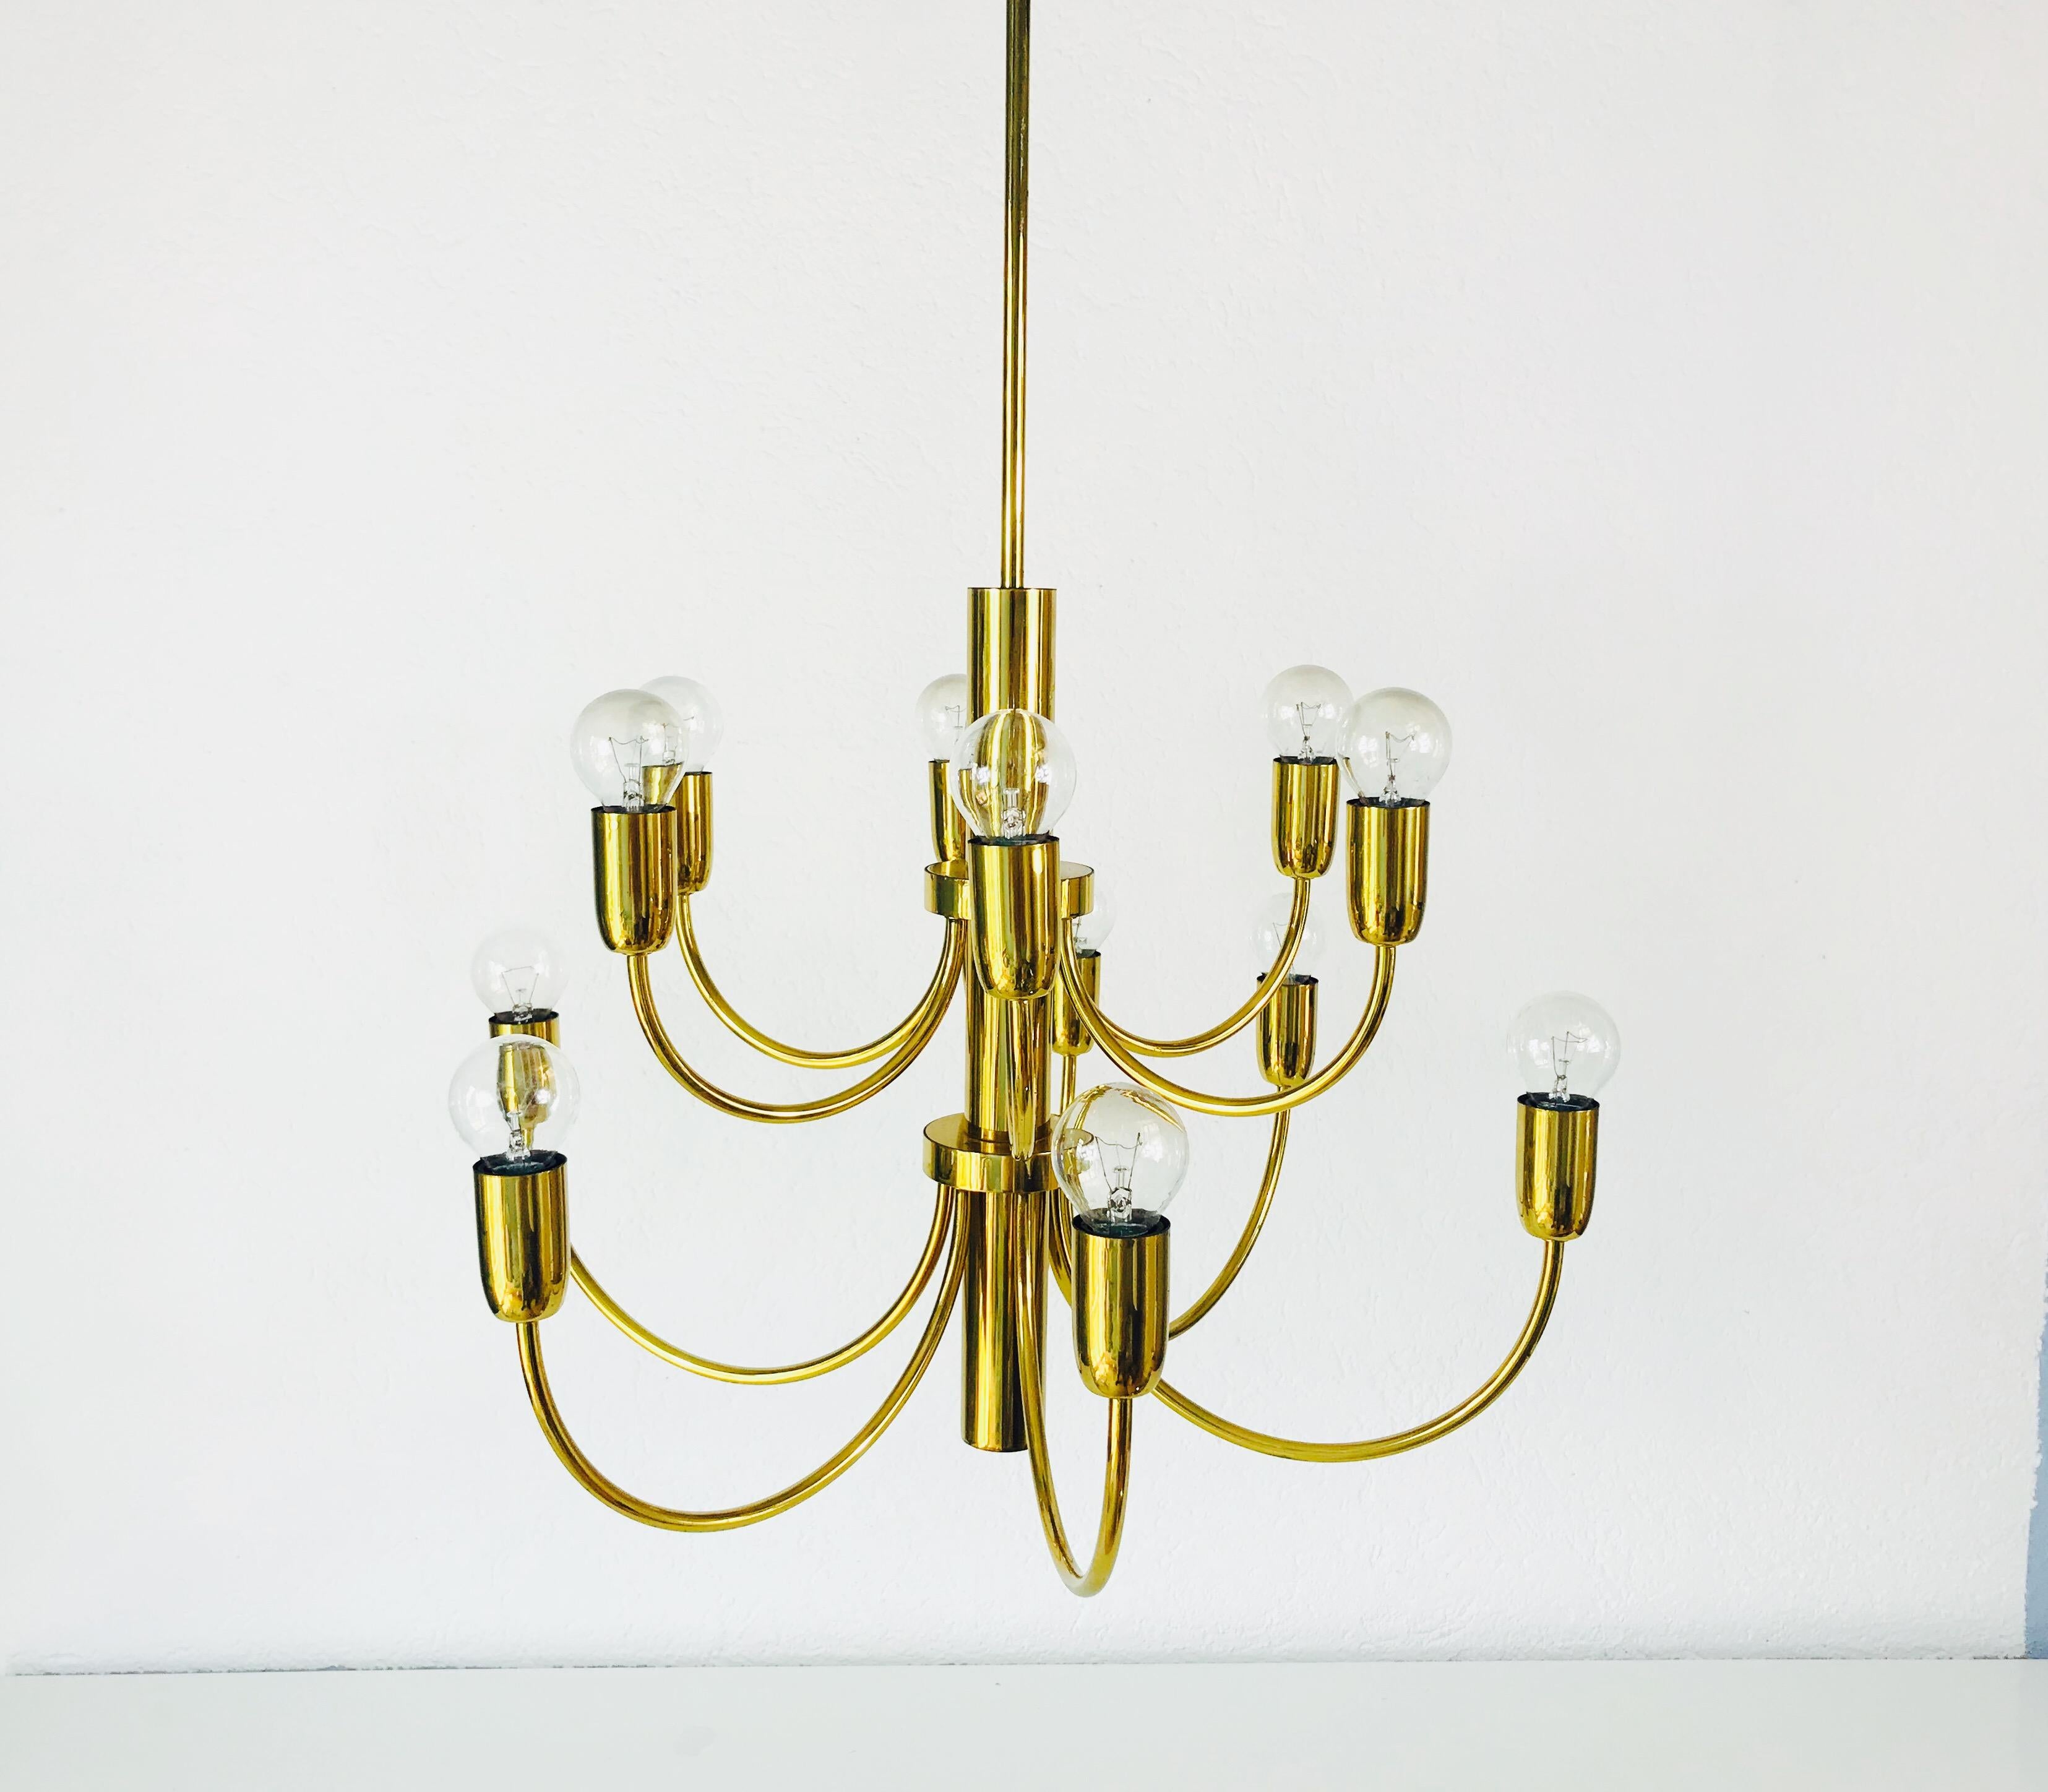 A midcentury chandelier made in Germany in the 1960s. It is fascinating with its twelve brass arms, each of it with an E14 light bulb. The body is also made of full brass. The shape of the light is similar to a spider.

The light requires twelve